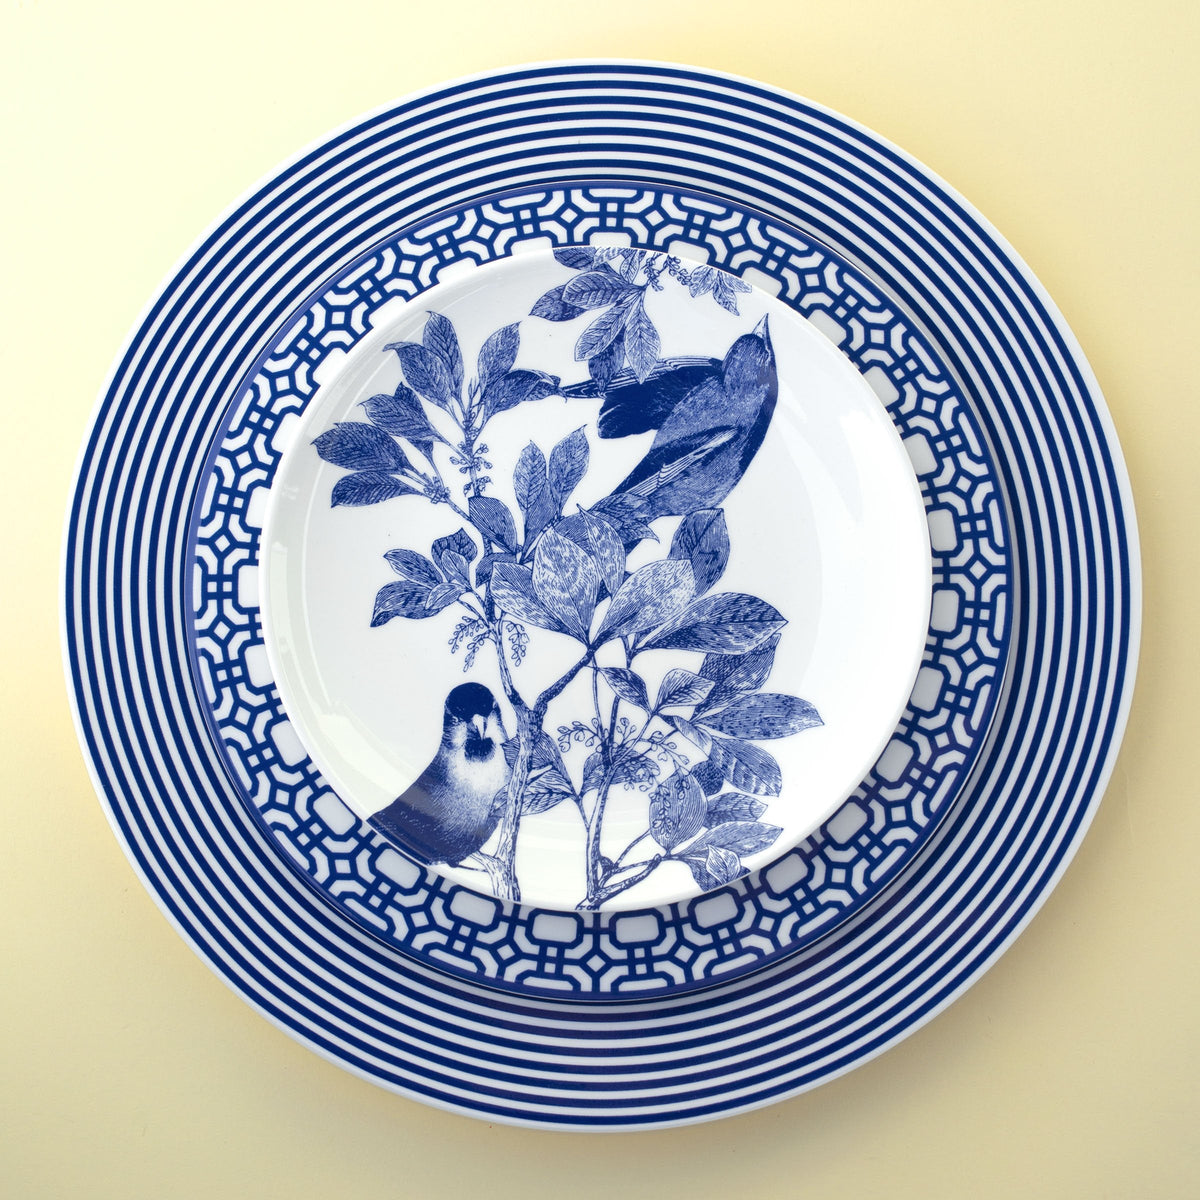 A blue and white Newport 4-Piece Place Setting with birds from the Caskata Artisanal Home dinnerware collection.